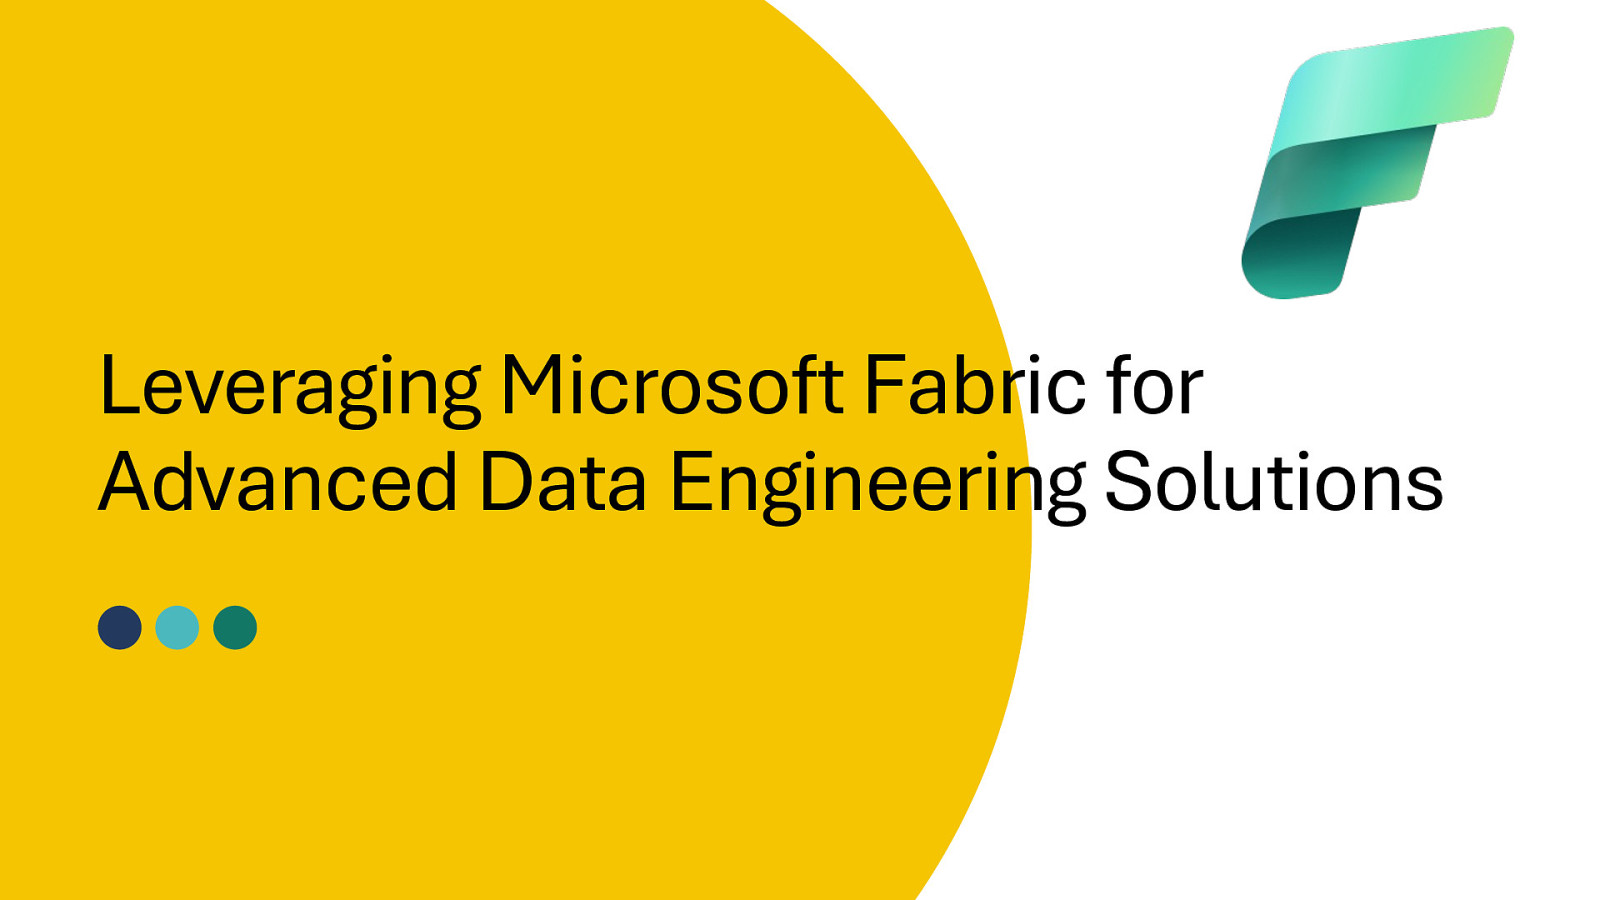 Leveraging Microsoft Fabric for Advanced Data Engineering Solutions